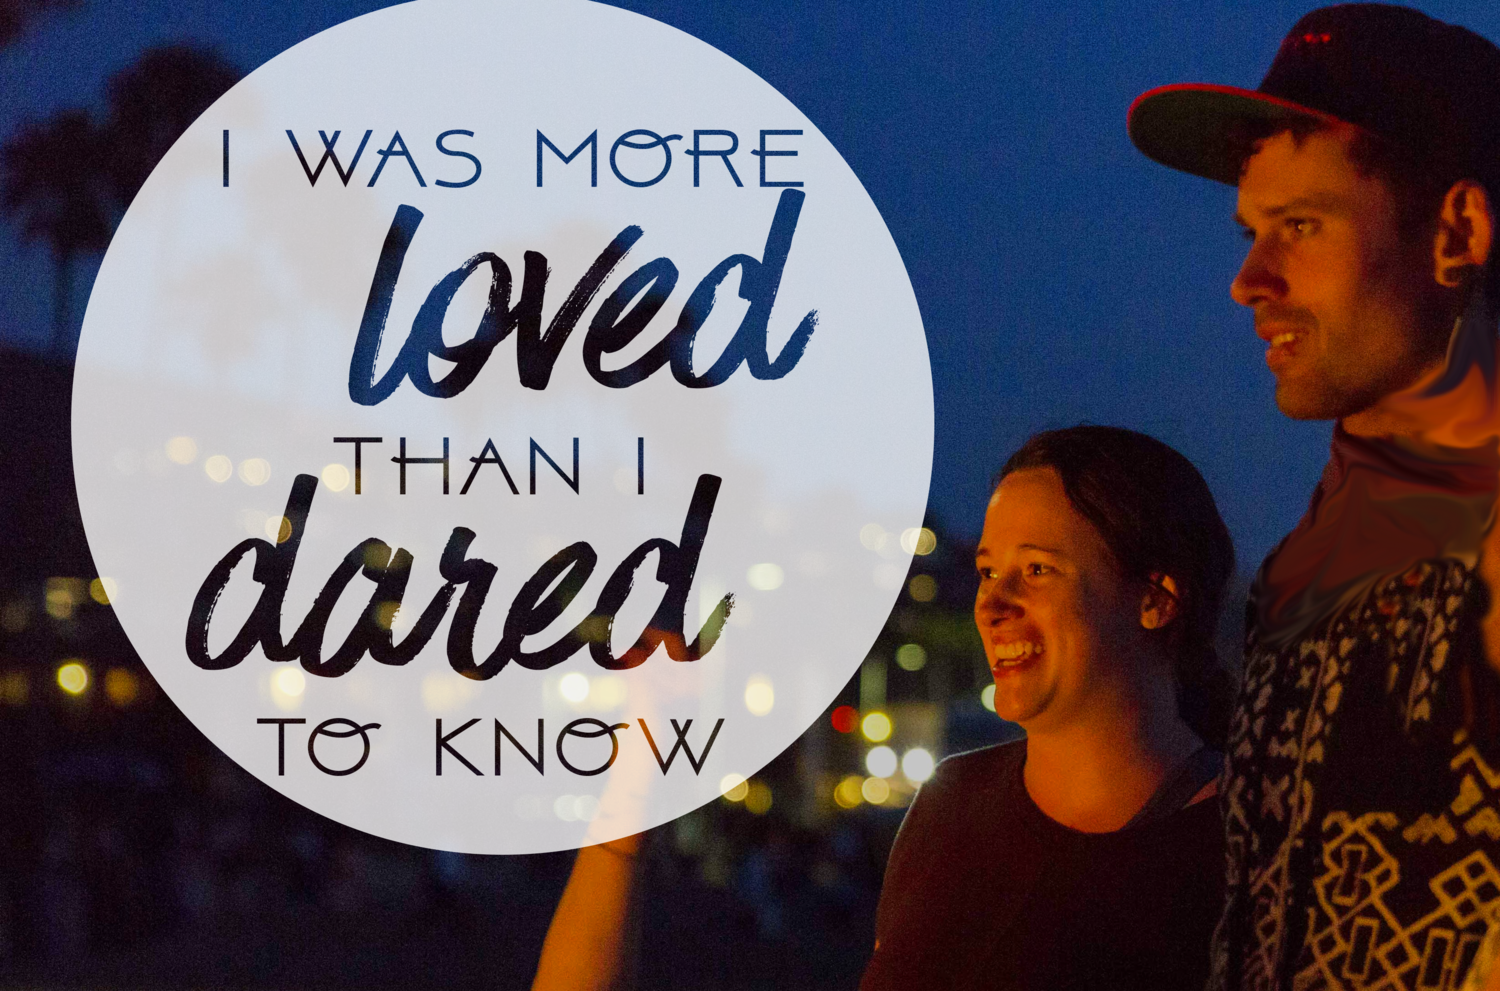 032| I Was More Loved Than I Dared to Know: A Conversation with My Siblings